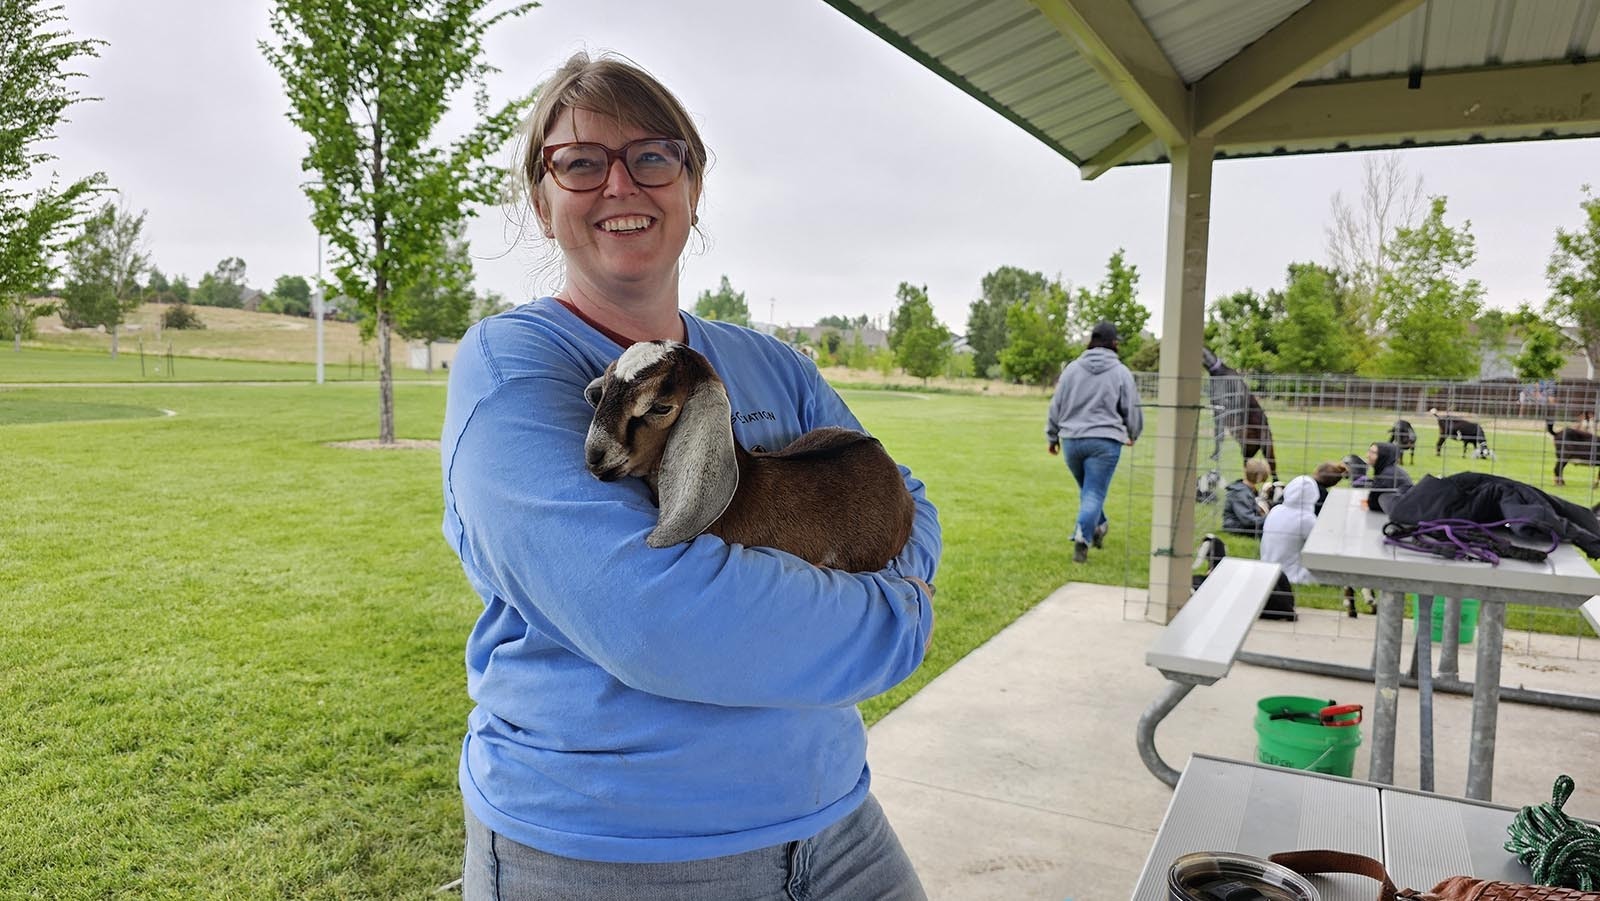 Wyoming Dairy Goat Association Vice President Caitlin Argyle holds a baby goat at Sun Valley Park.